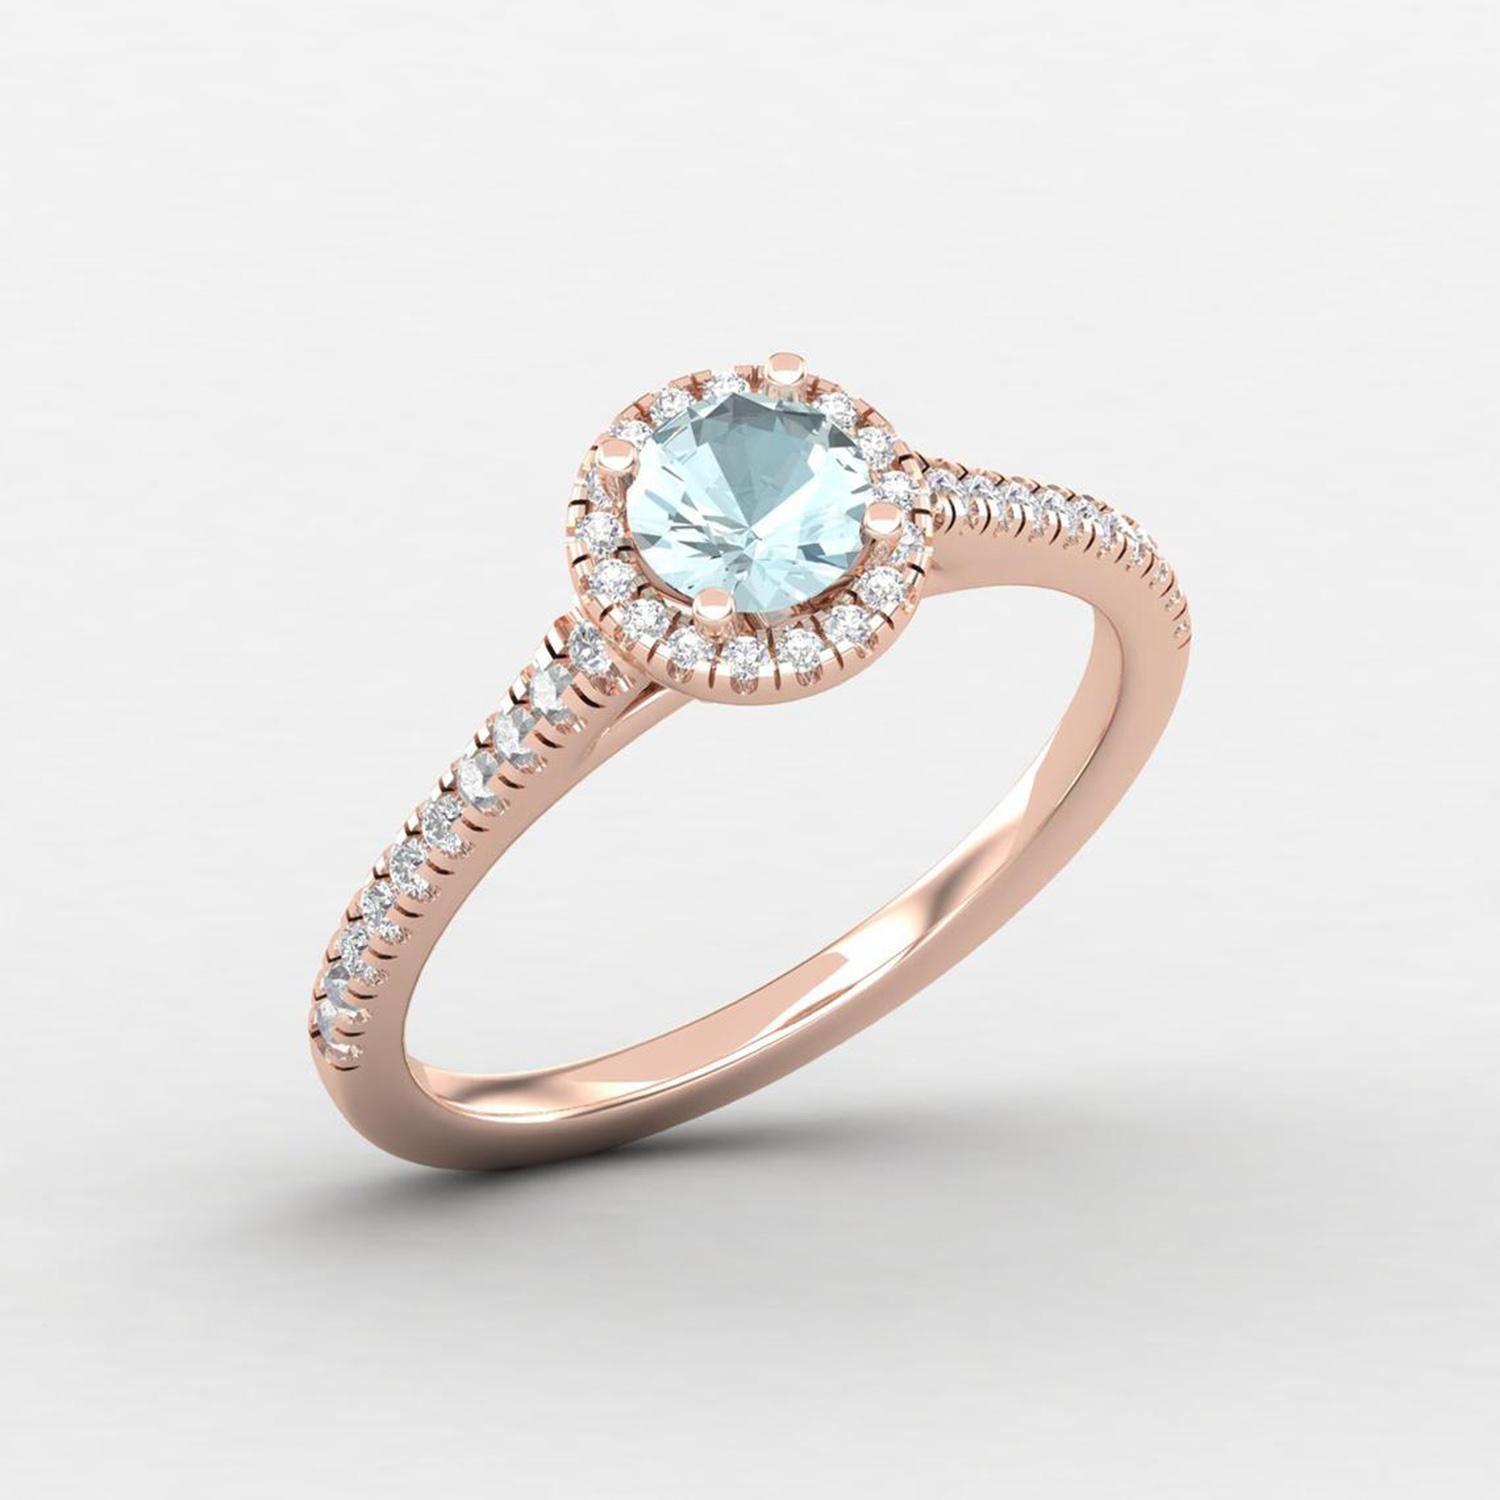 14 K Gold Aquamarine Ring / Diamond Solitaire Ring / Engagement Ring for Her For Sale 1